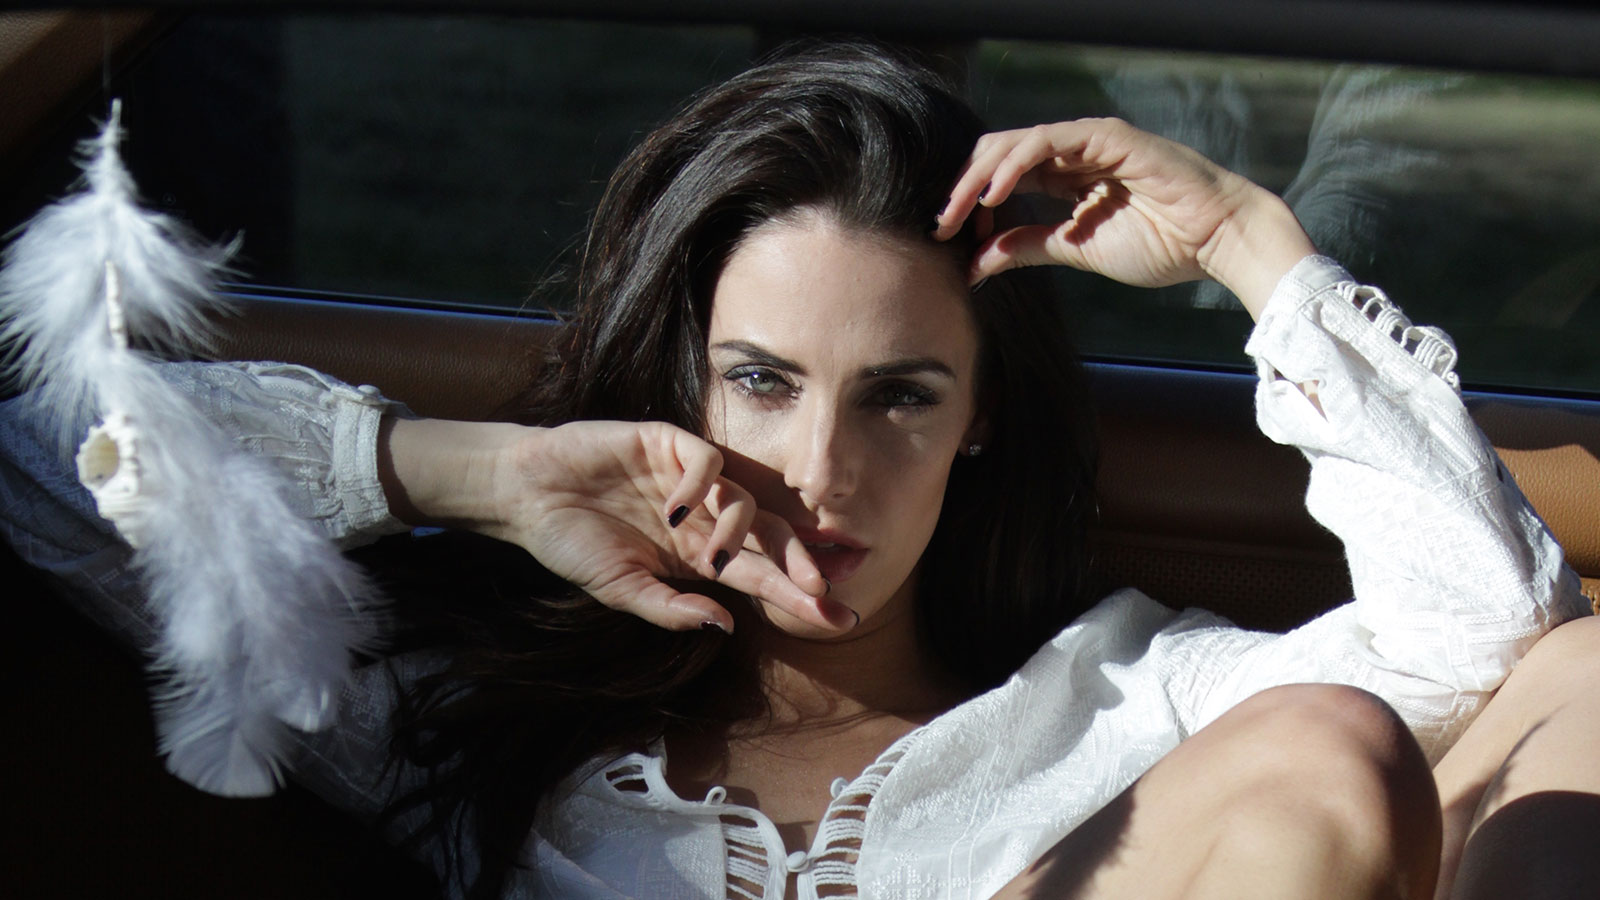 Jessica Lowndes Official Website See more ideas about jessica lowndes, lowndes, jessica. jessicalowndes com